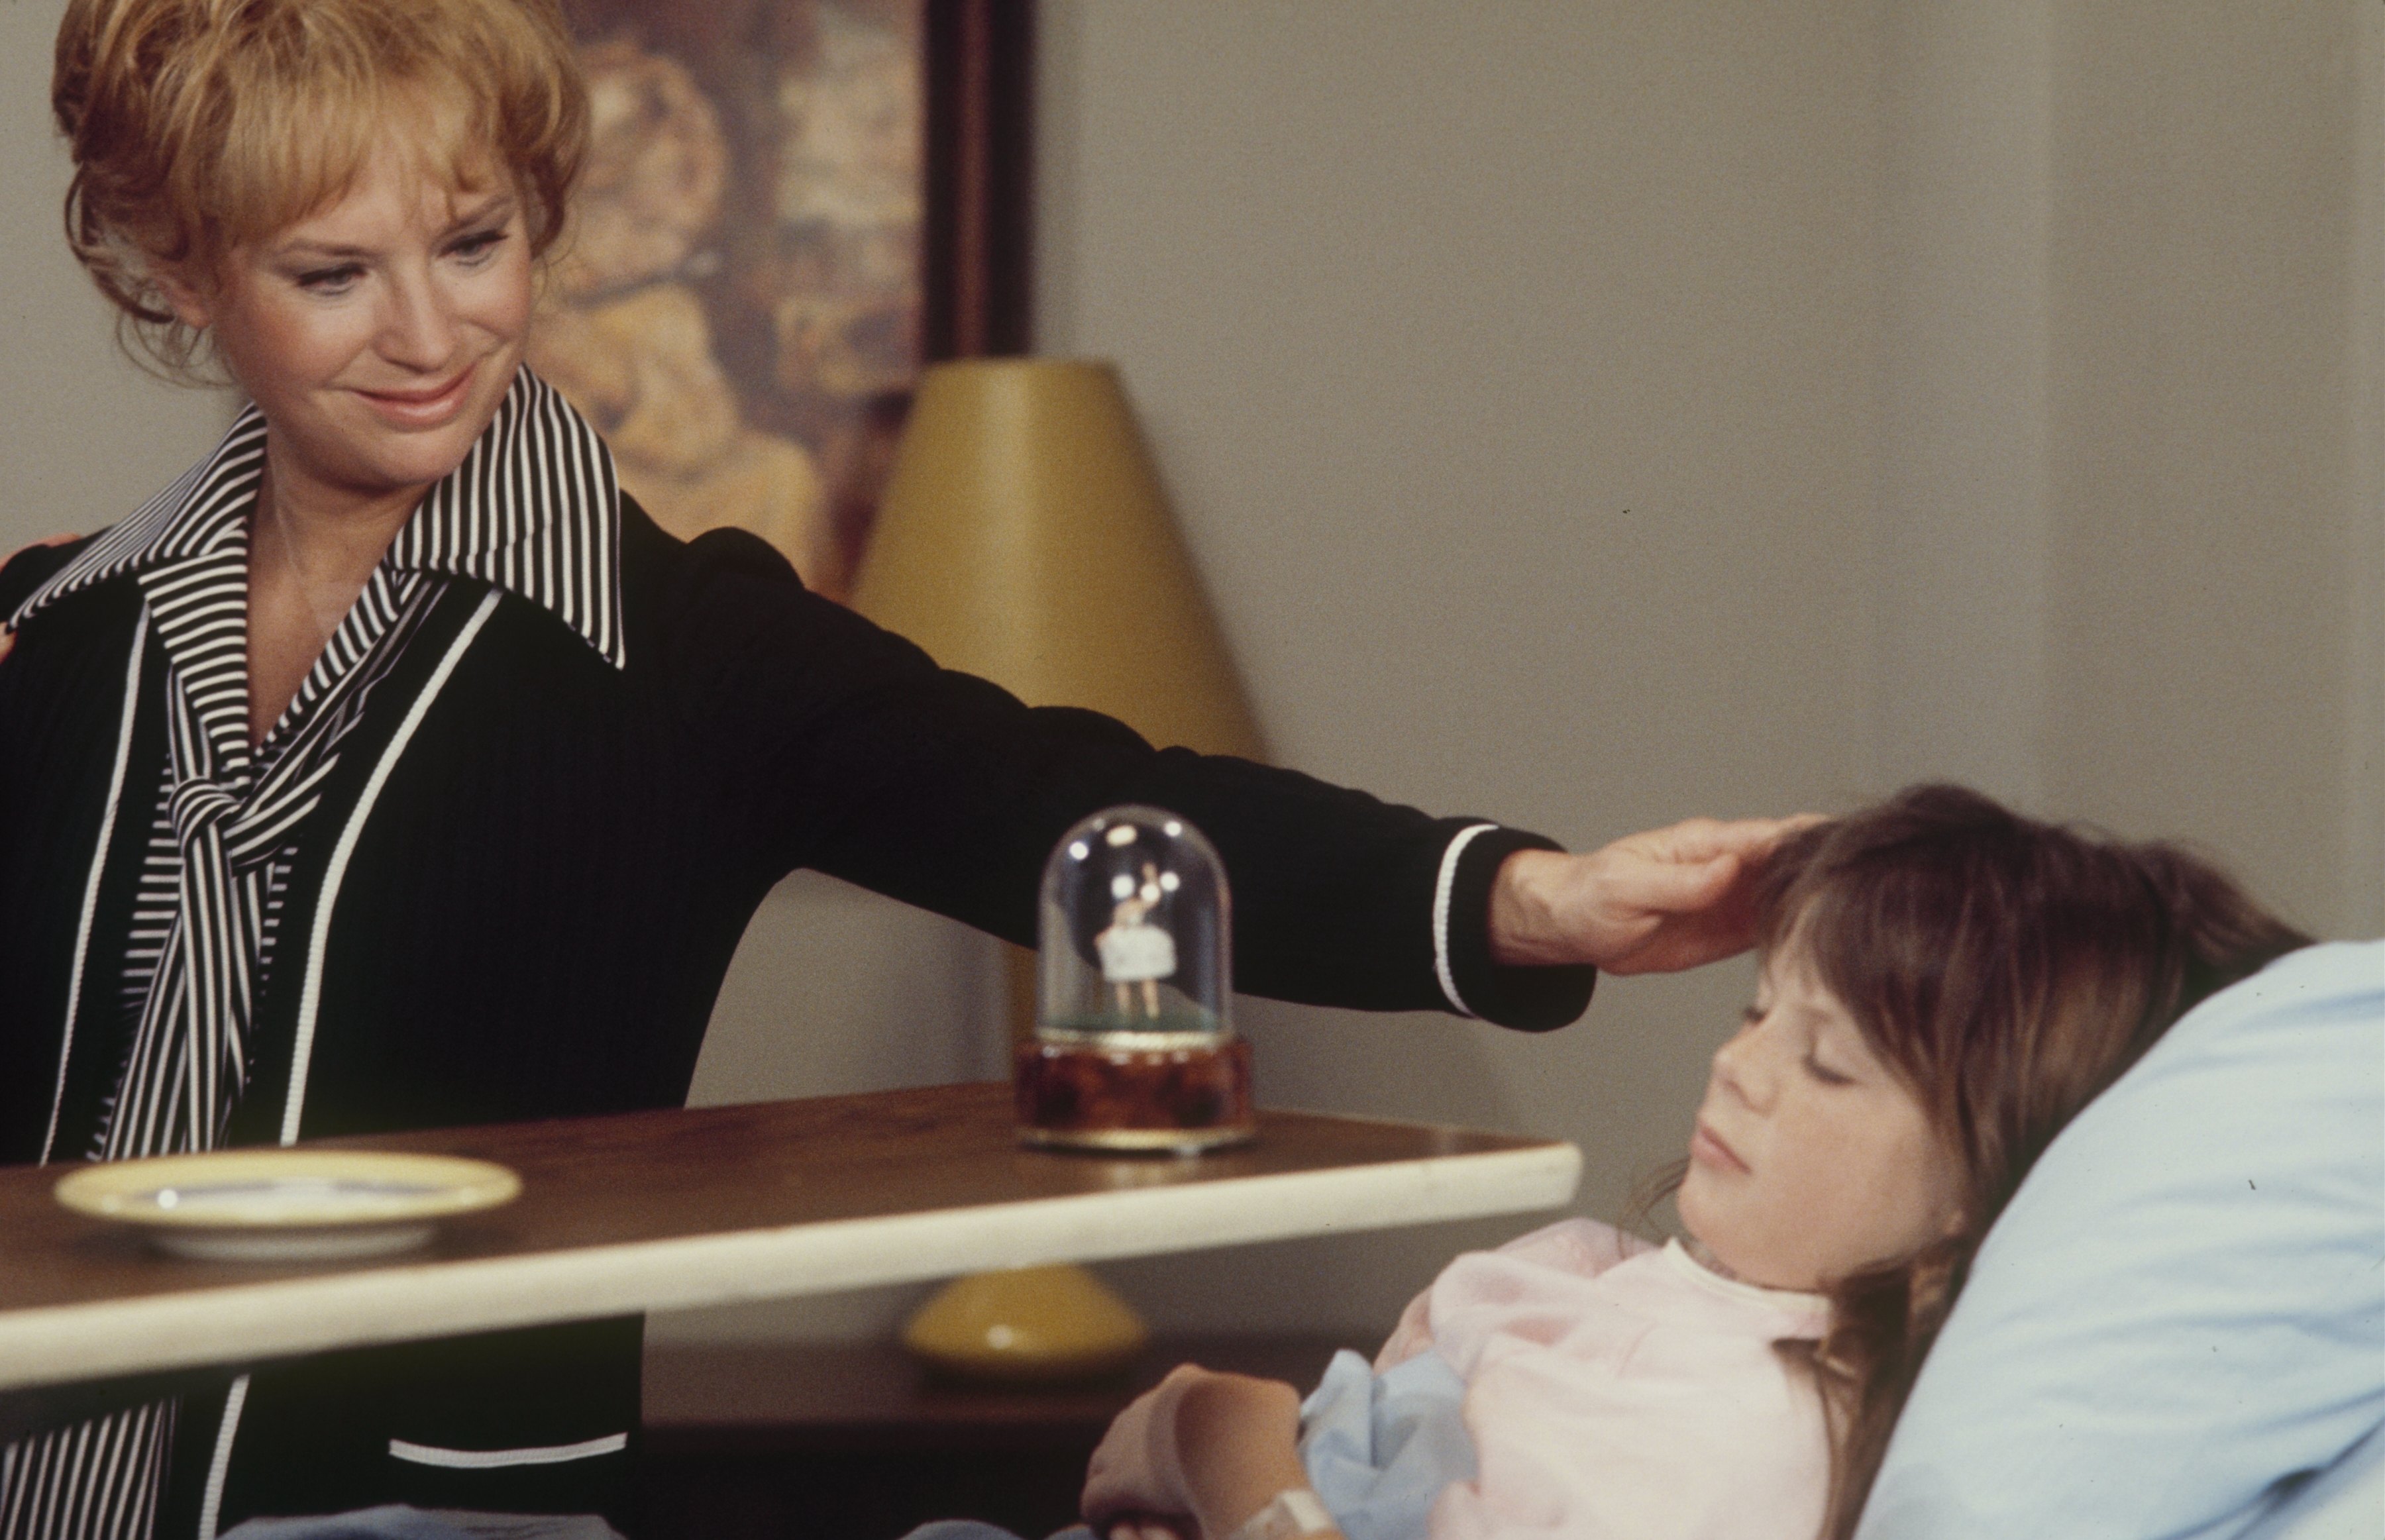 Lois Neddleton and Dawn Lyn in the "Child of Silence" episode of "My Three Sons" in 1974 | Source: Getty Images